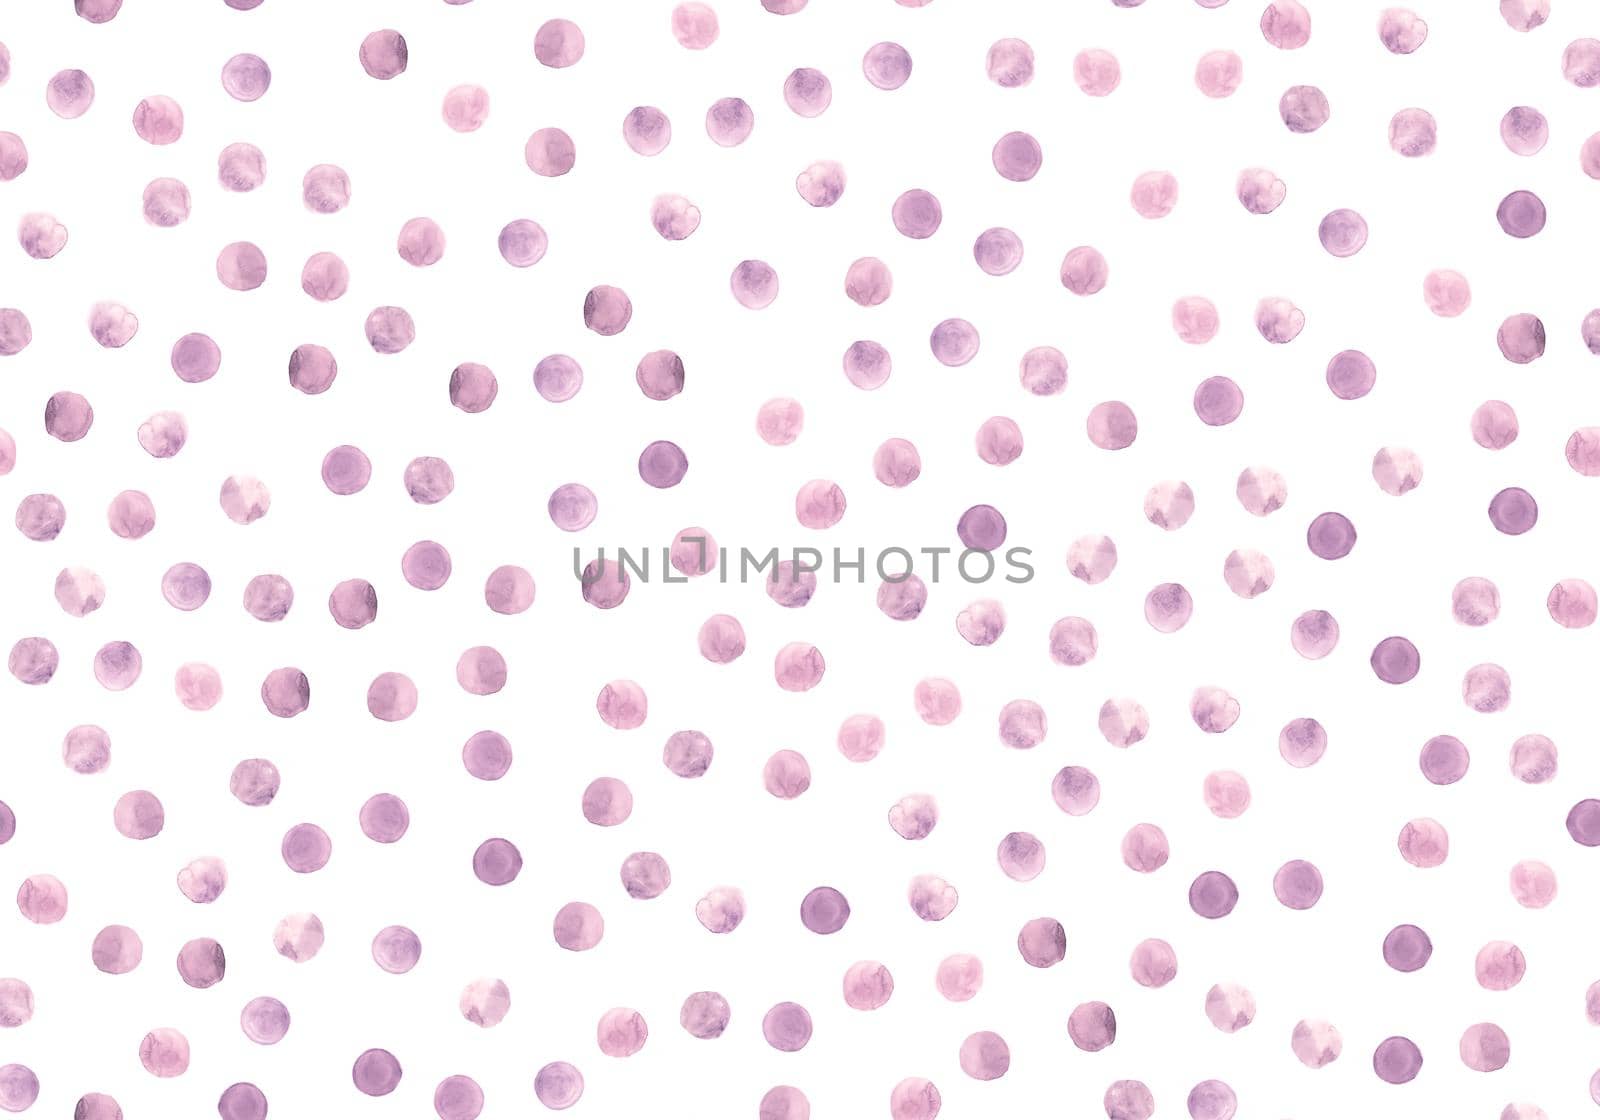 Seamless Watercolour Wallpaper. Graphic Polka Dots Illustration. White Hand Paint Circles. Pink Watercolor Wallpaper. Art Rounds Pattern. Cute Geometric Spots Background. Watercolor Wallpaper.